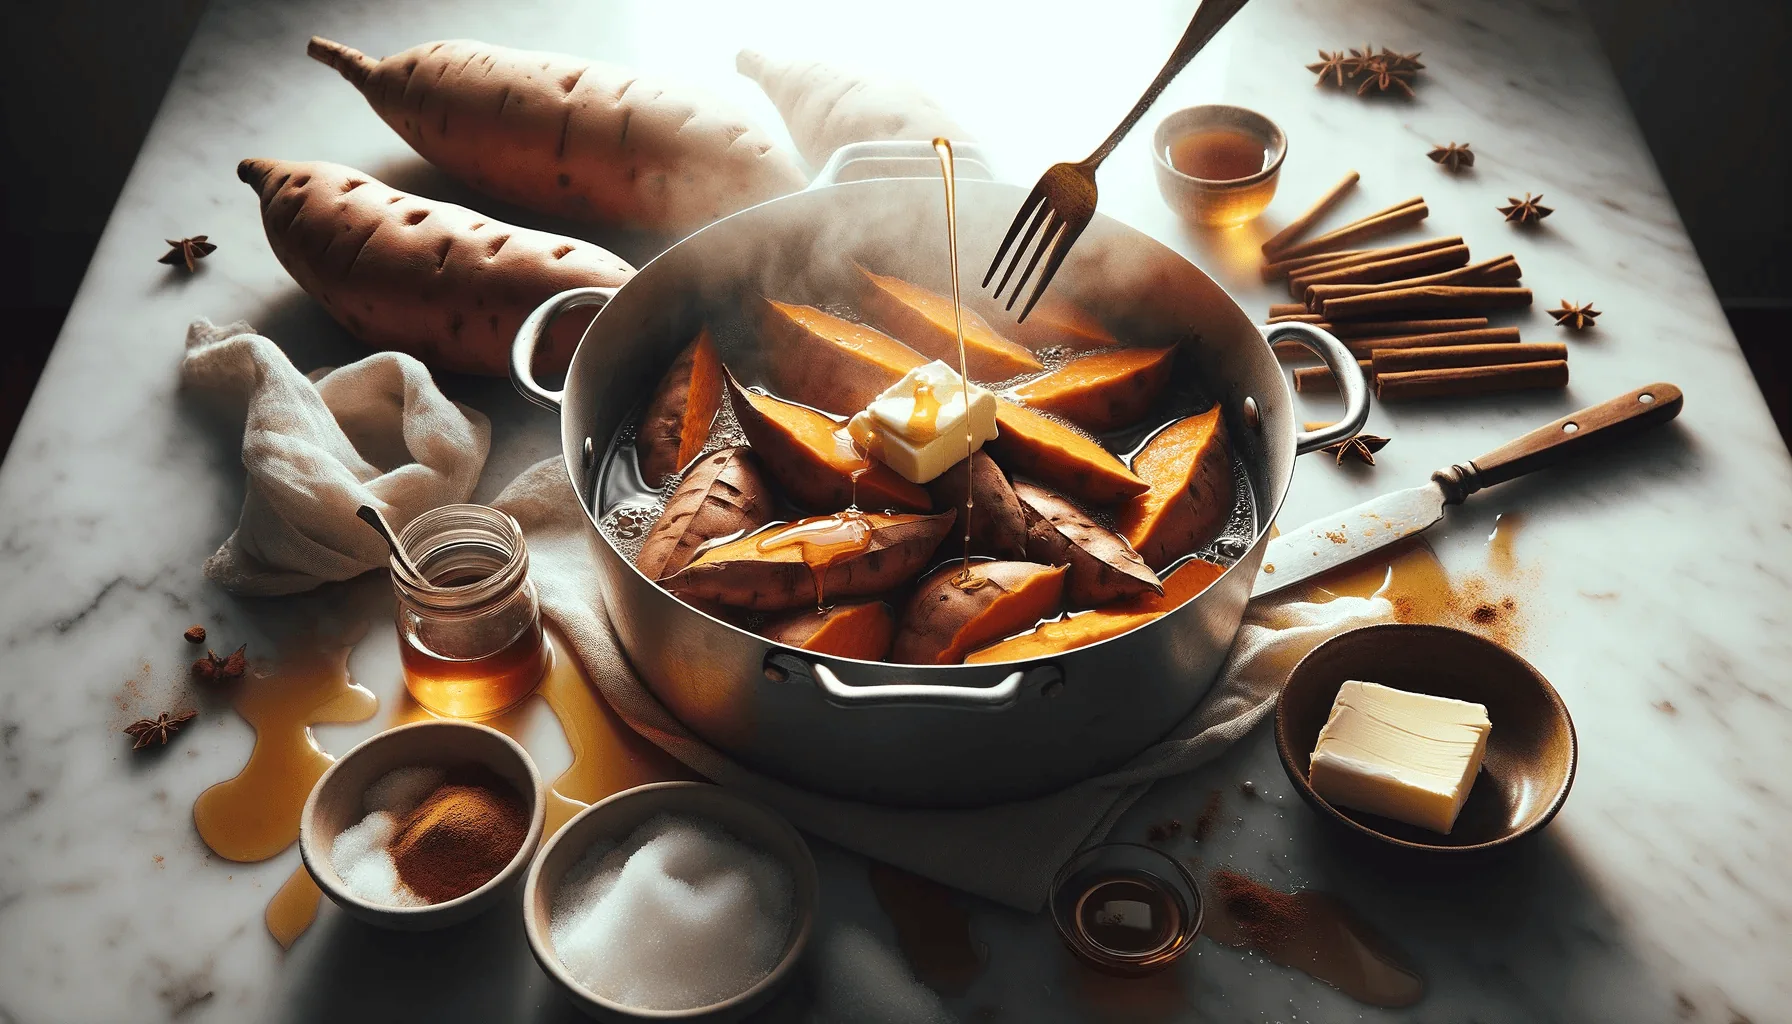 Sweet potatoes being cooked in a pot, with ingredients like butter and maple syrup nearby